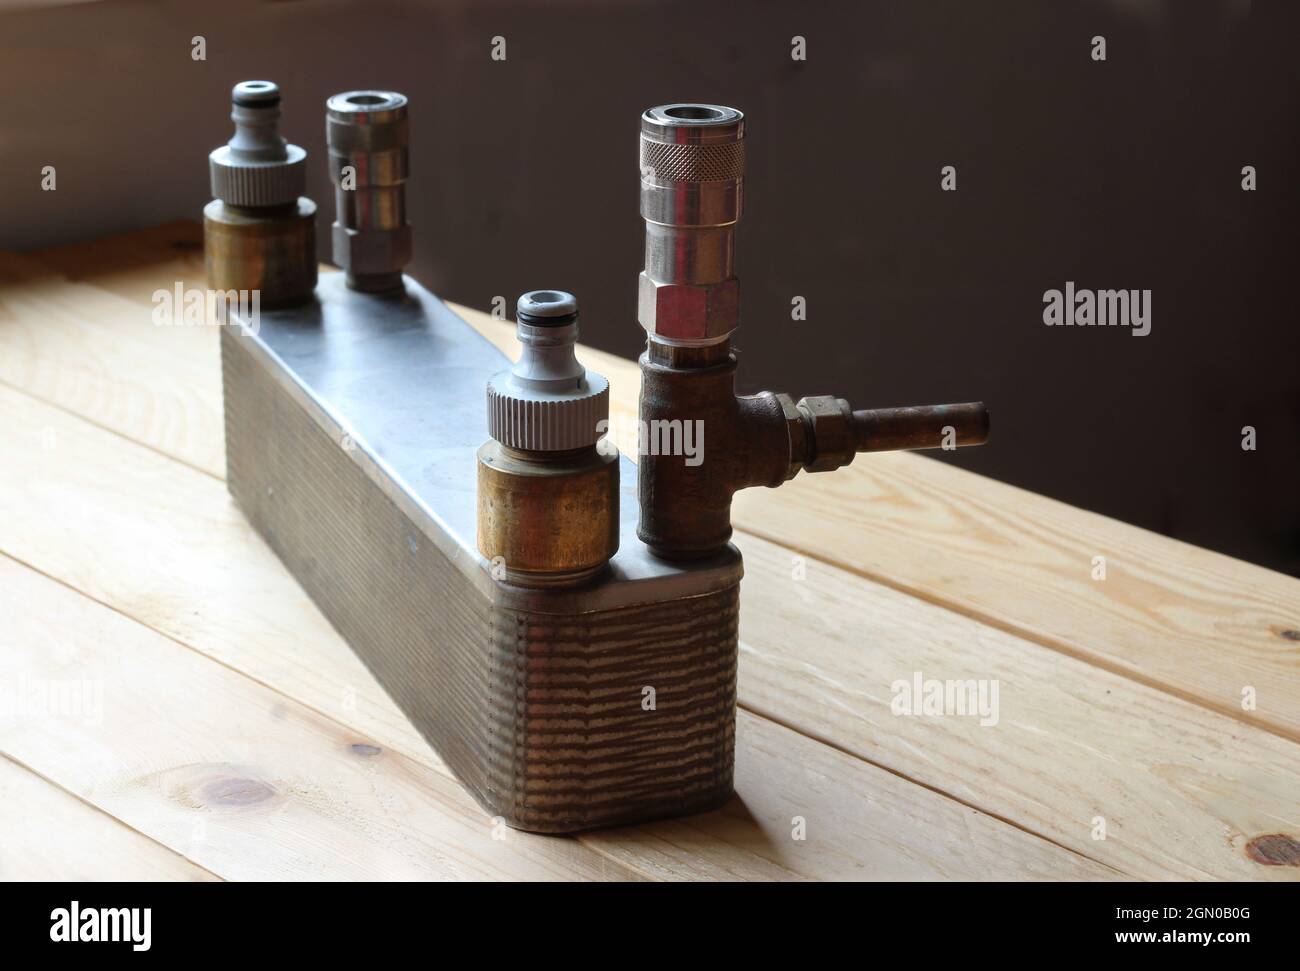 Close up image of a heat exchanger used for Home Beer Brewing. On a wooden table, ambient lighting, copyspace to right. Stock Photo